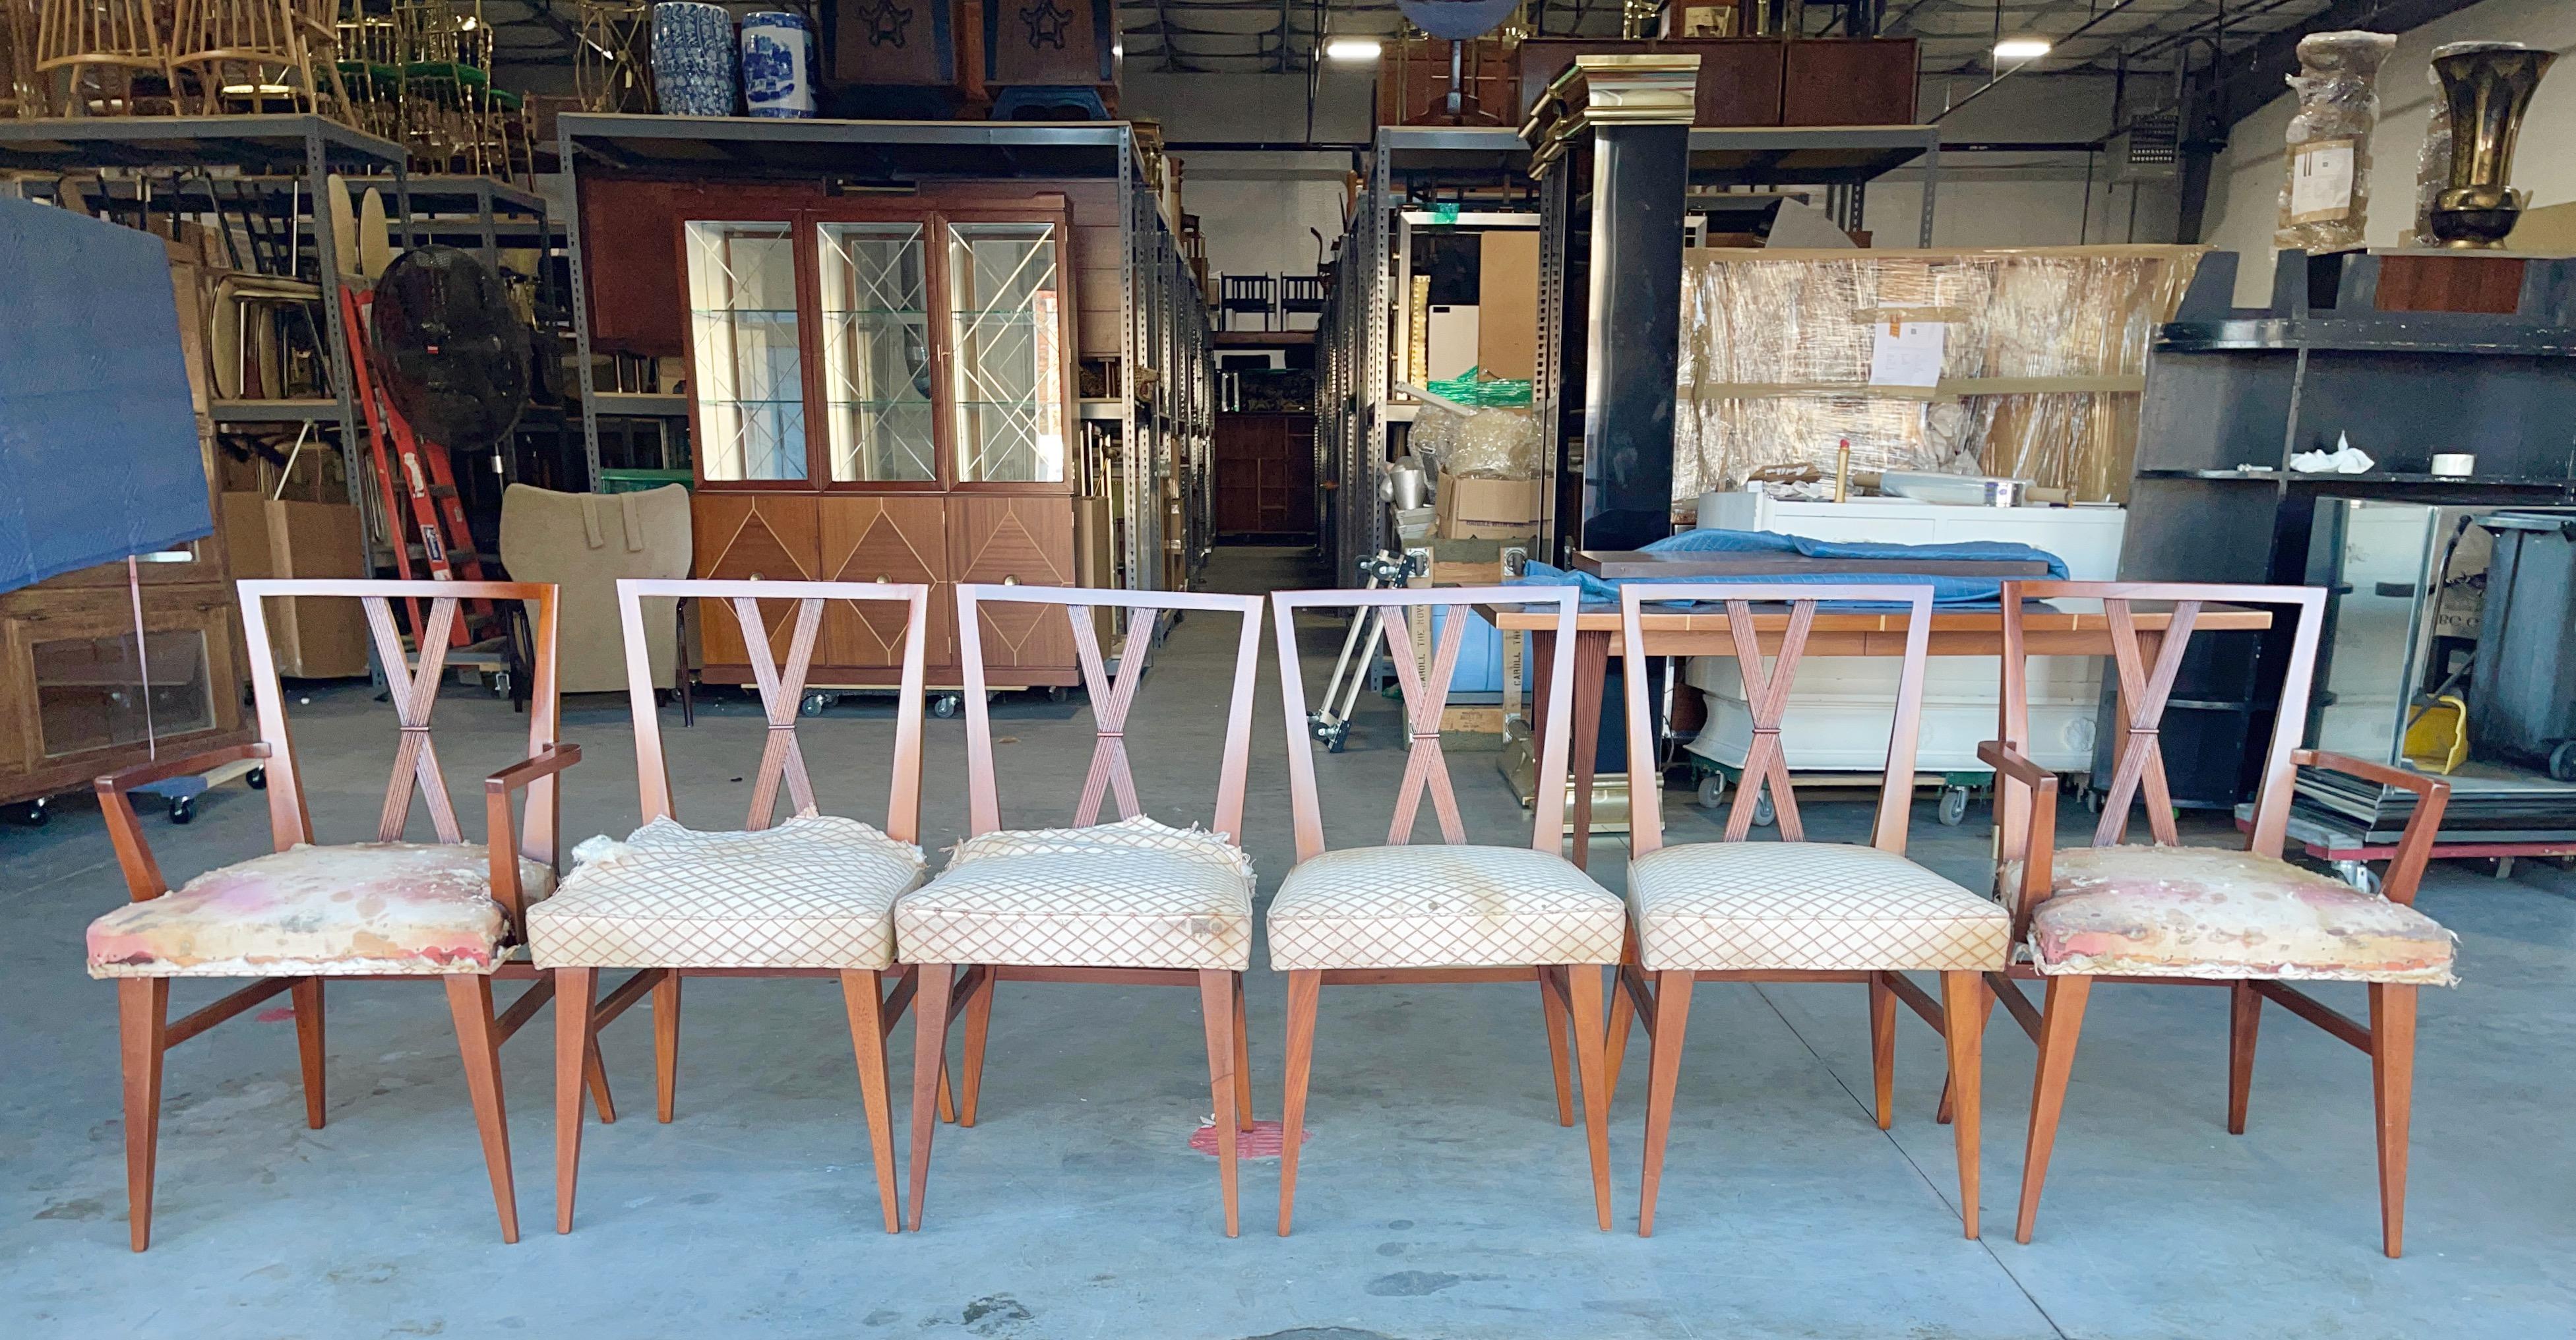 Set of six original Tommi Parzinger X back mahogany dining chairs for Charak Modern.
Four side chairs and two arm chairs. Arm height 26 inches.
All chairs have been beautifully refinished by our expert restorer and are ready for the seats to be